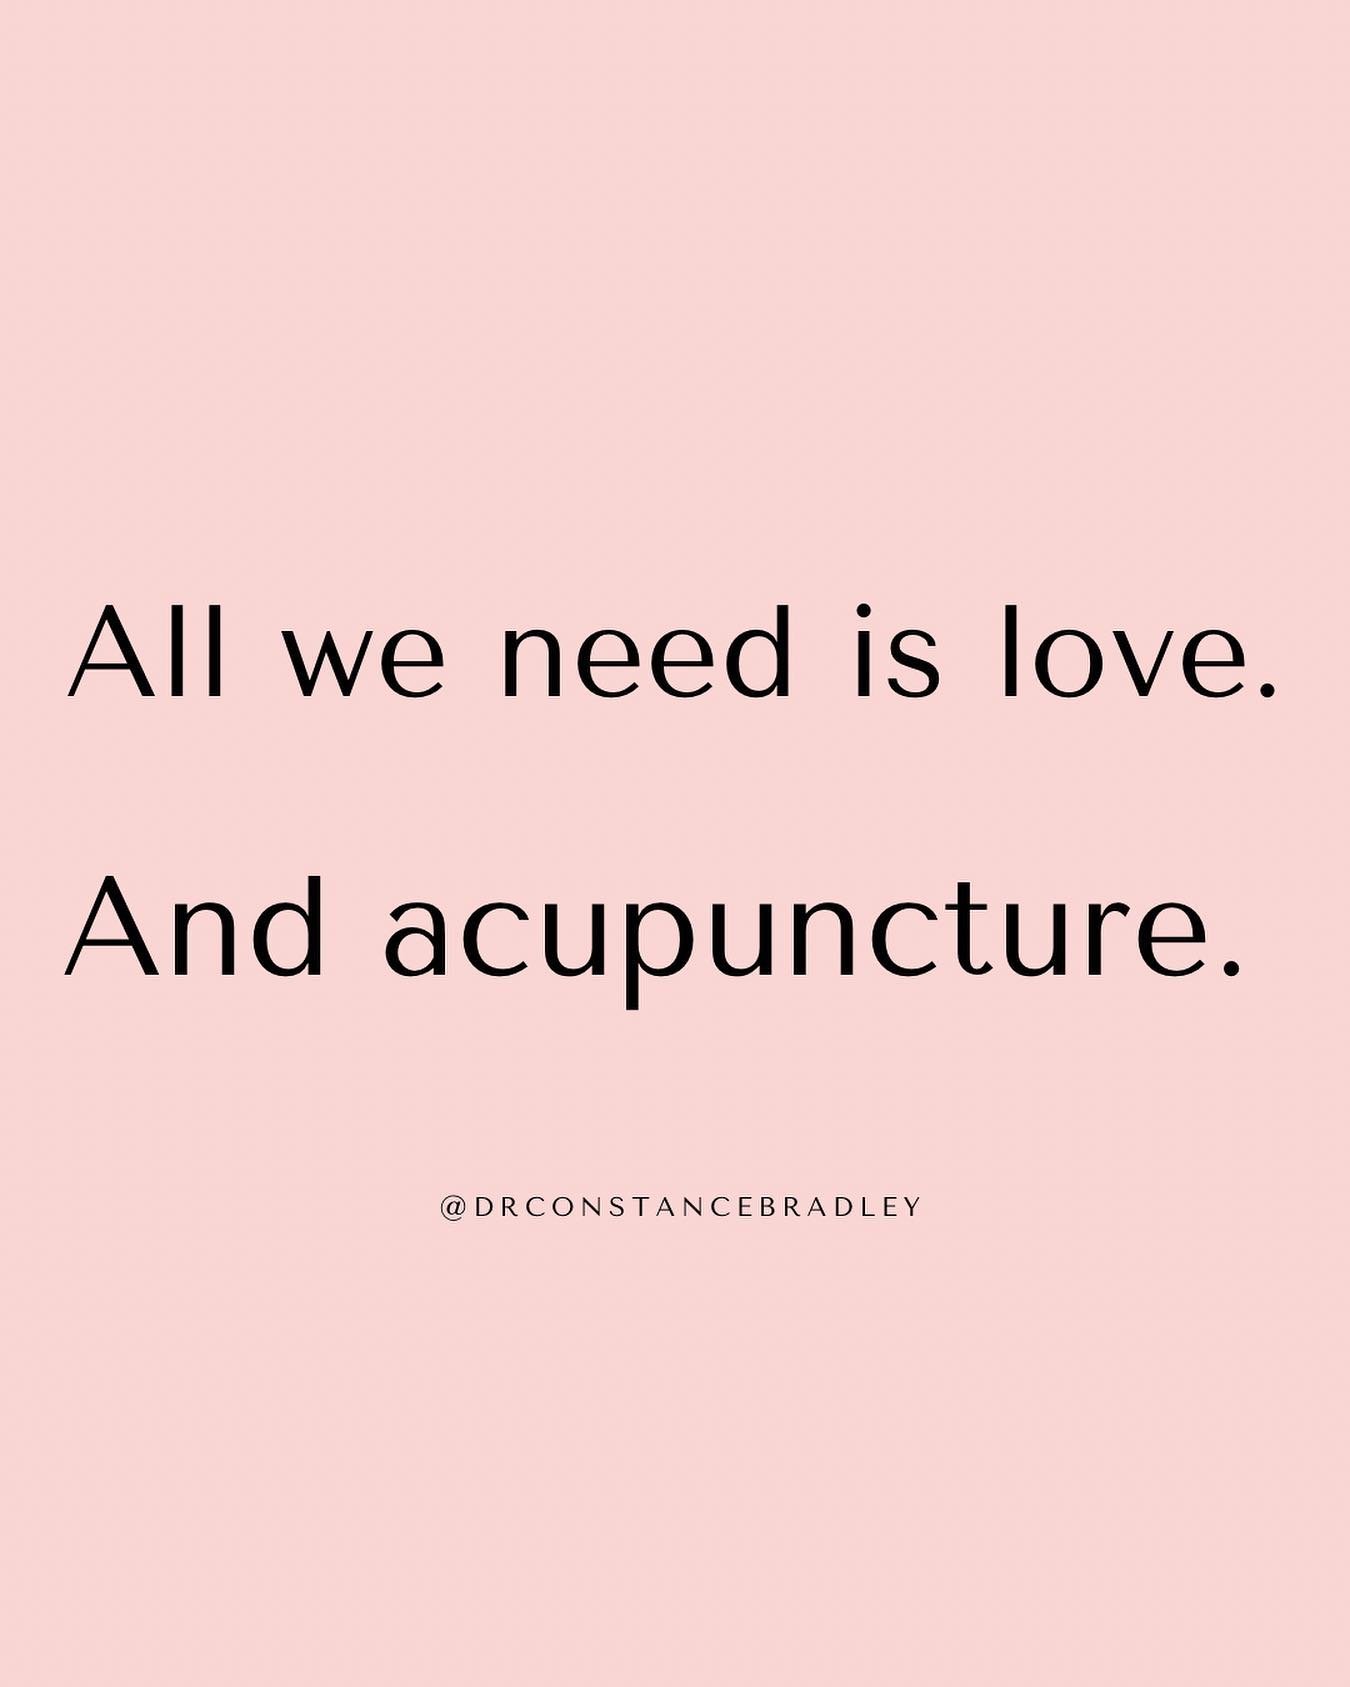 Just the basics &hearts;️ 📌 

#acupuncture 
#acupressure 
#cosmeticacupuncture 
#scottsdalecosmeticacupuncture
#cosmeticacupunctureScottsdale 
#scottsdaleacupuncture 
#acupuncturescottsdale 
#facialrejuvenationacupuncture 
#facialacupressure 
#facia